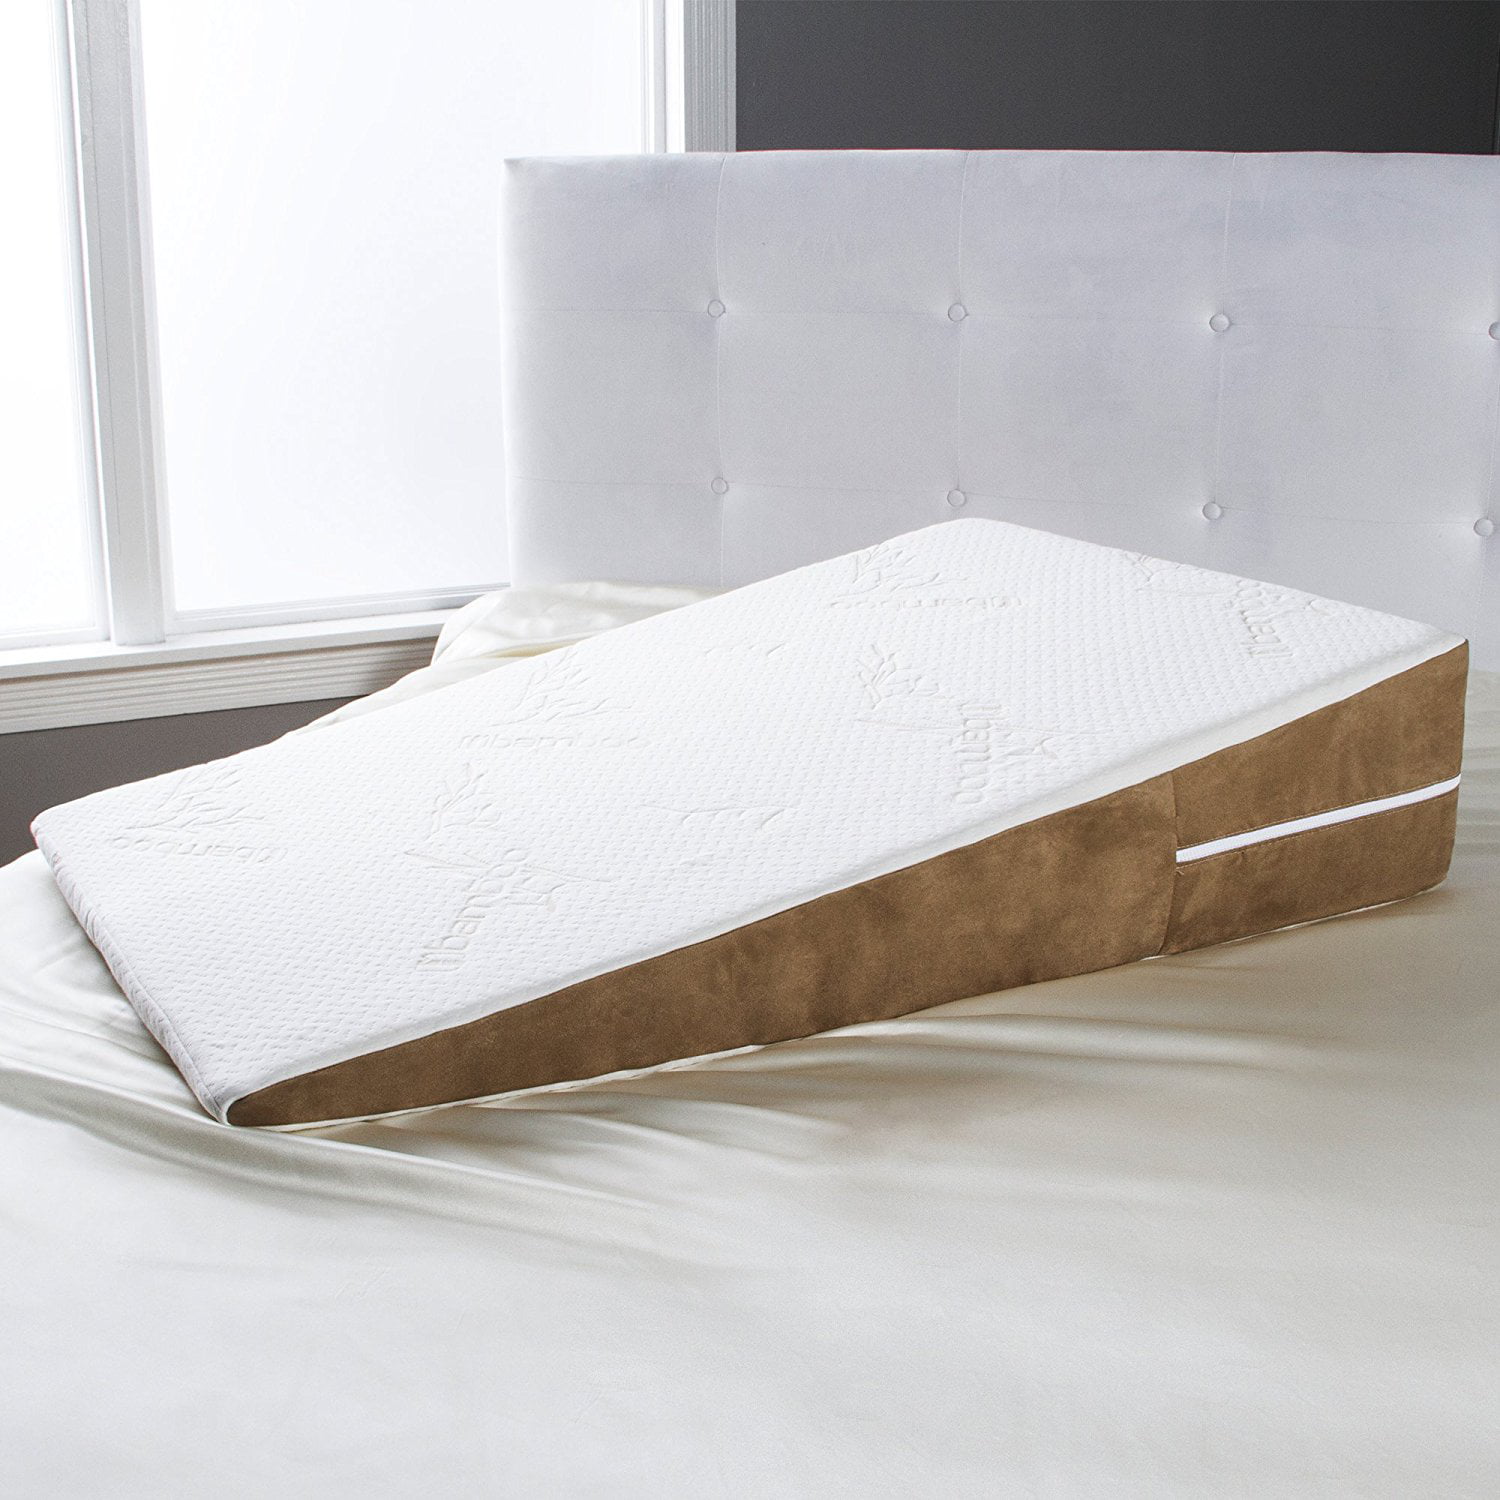 Avana Contoured Bed Wedge Support Pillow with Bamboo Cover for Side Sleepers Original Memory Foam